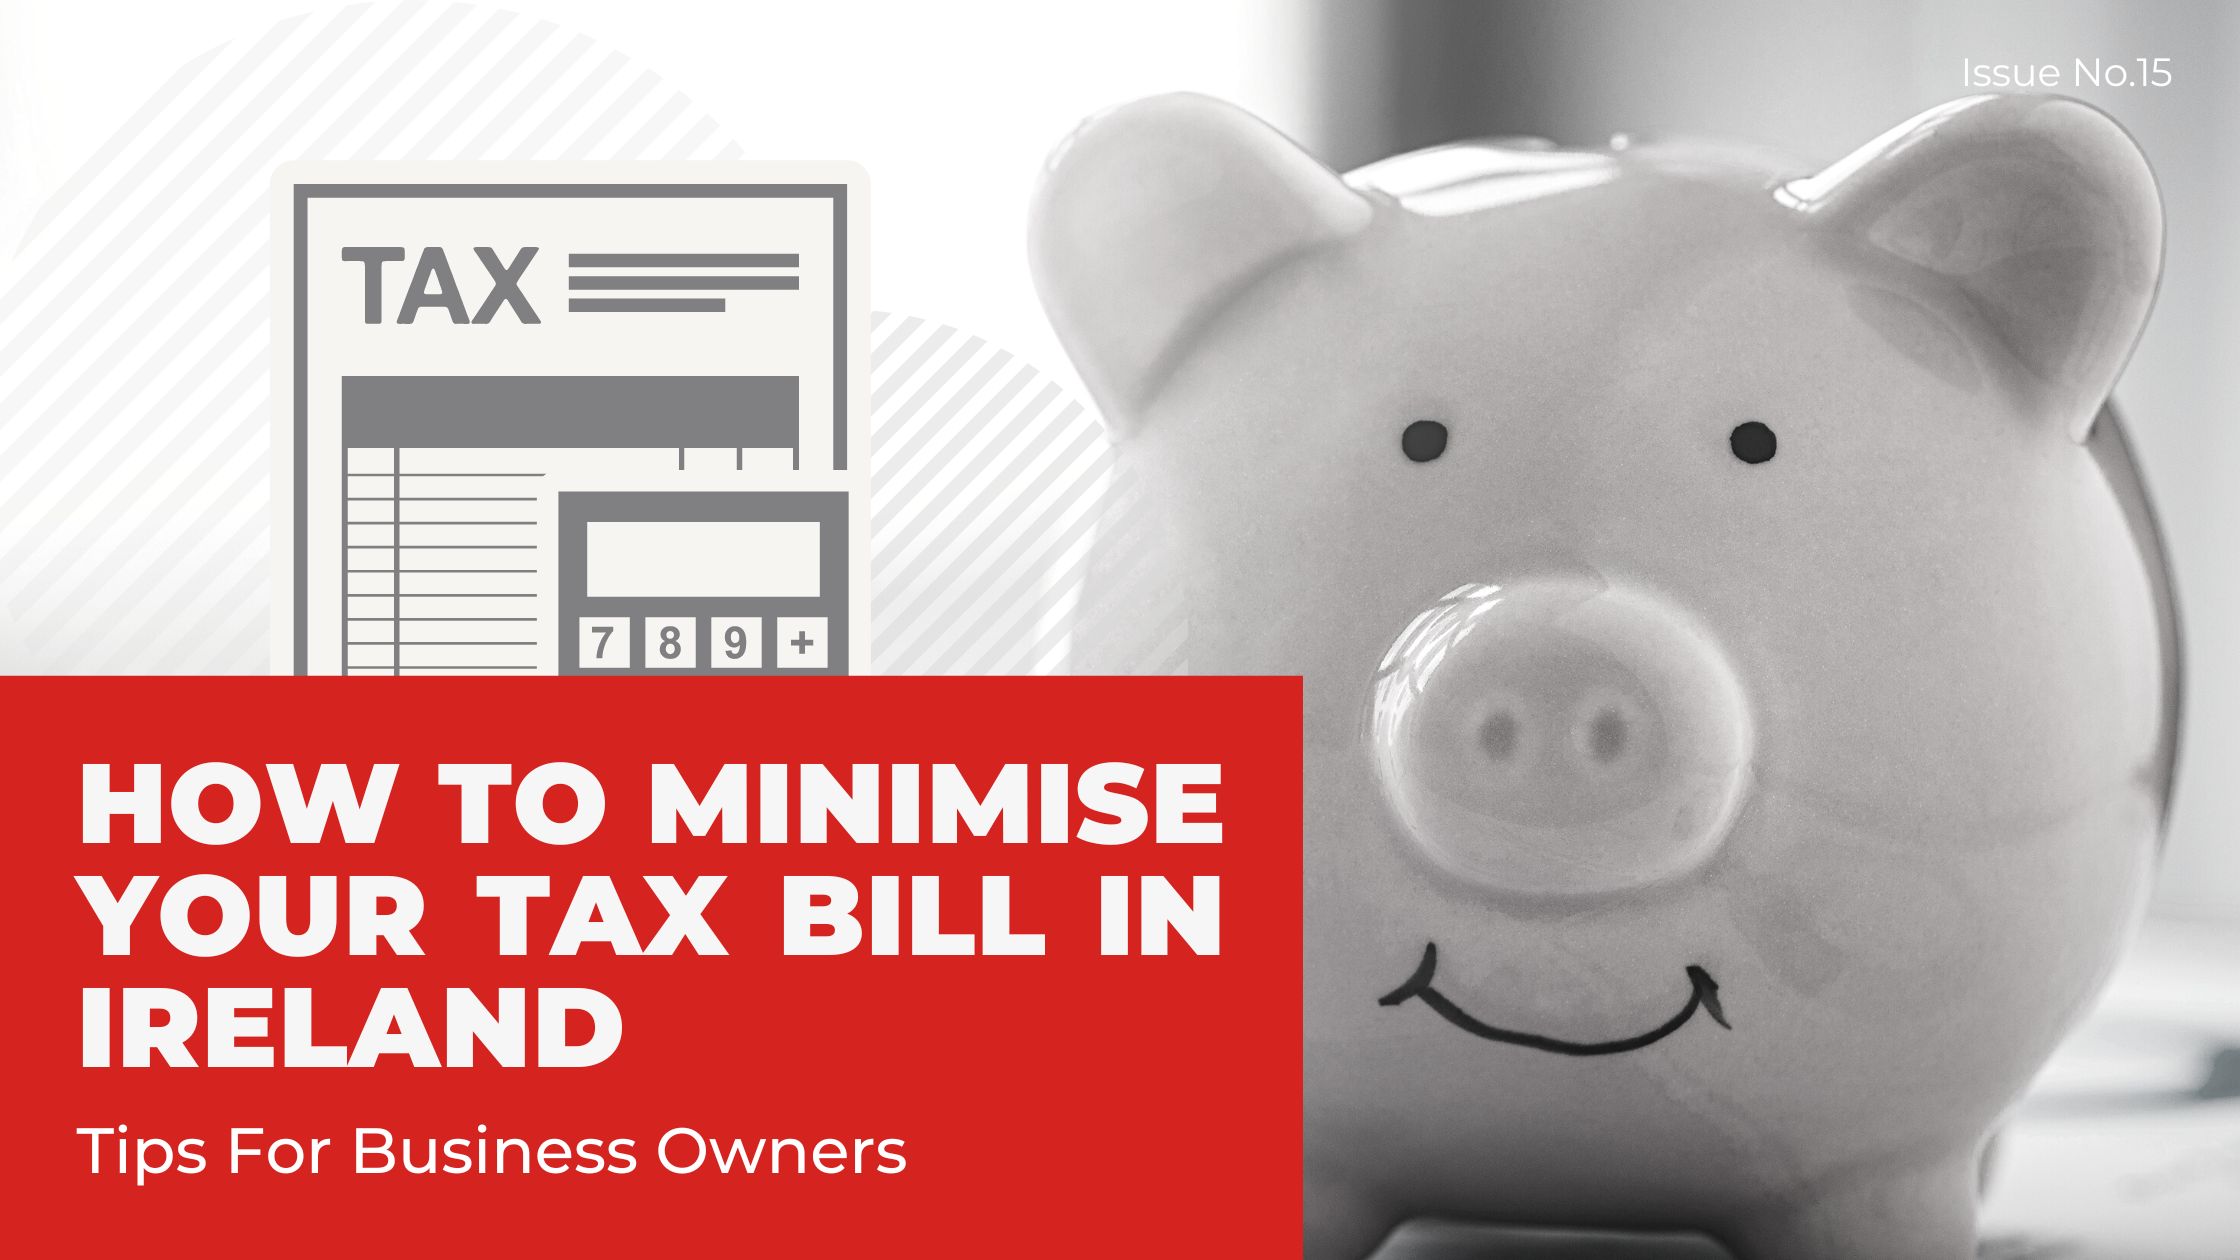 You are currently viewing TIPS FOR BUSINESS OWNERS – HOW TO MINIMISE YOUR TAX BILL IN IRELAND